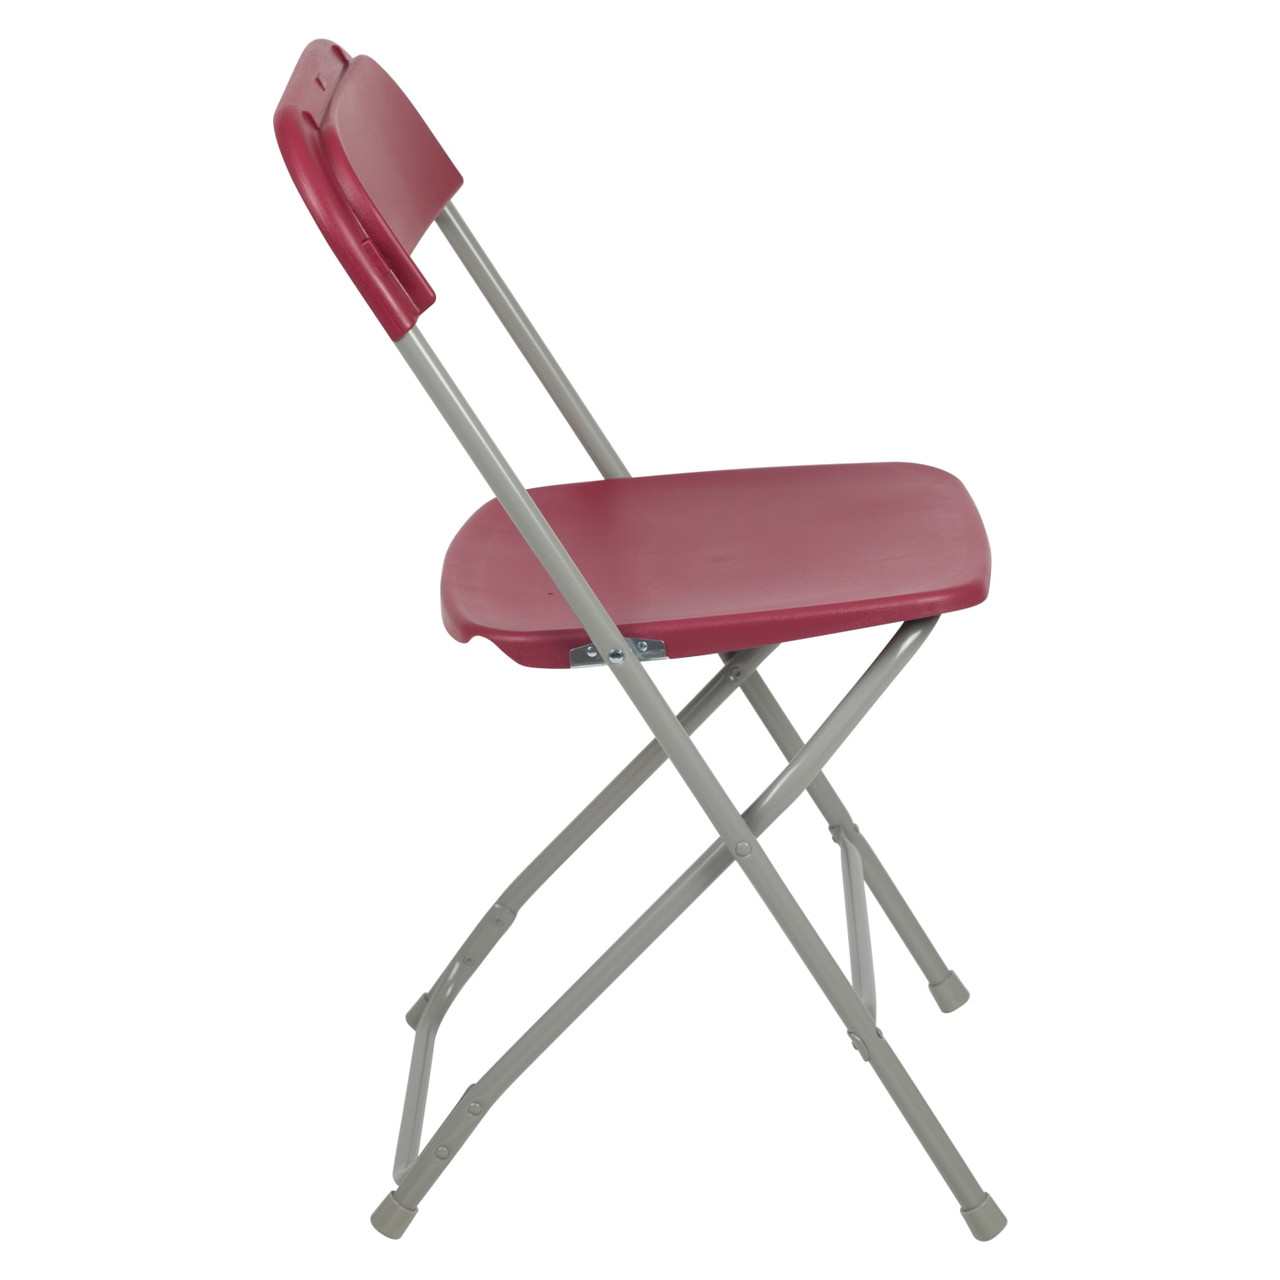 Hercules  Series Plastic Folding Chair - Red - 6 Pack Comfortable Event Chair-Lightweight Folding Chair